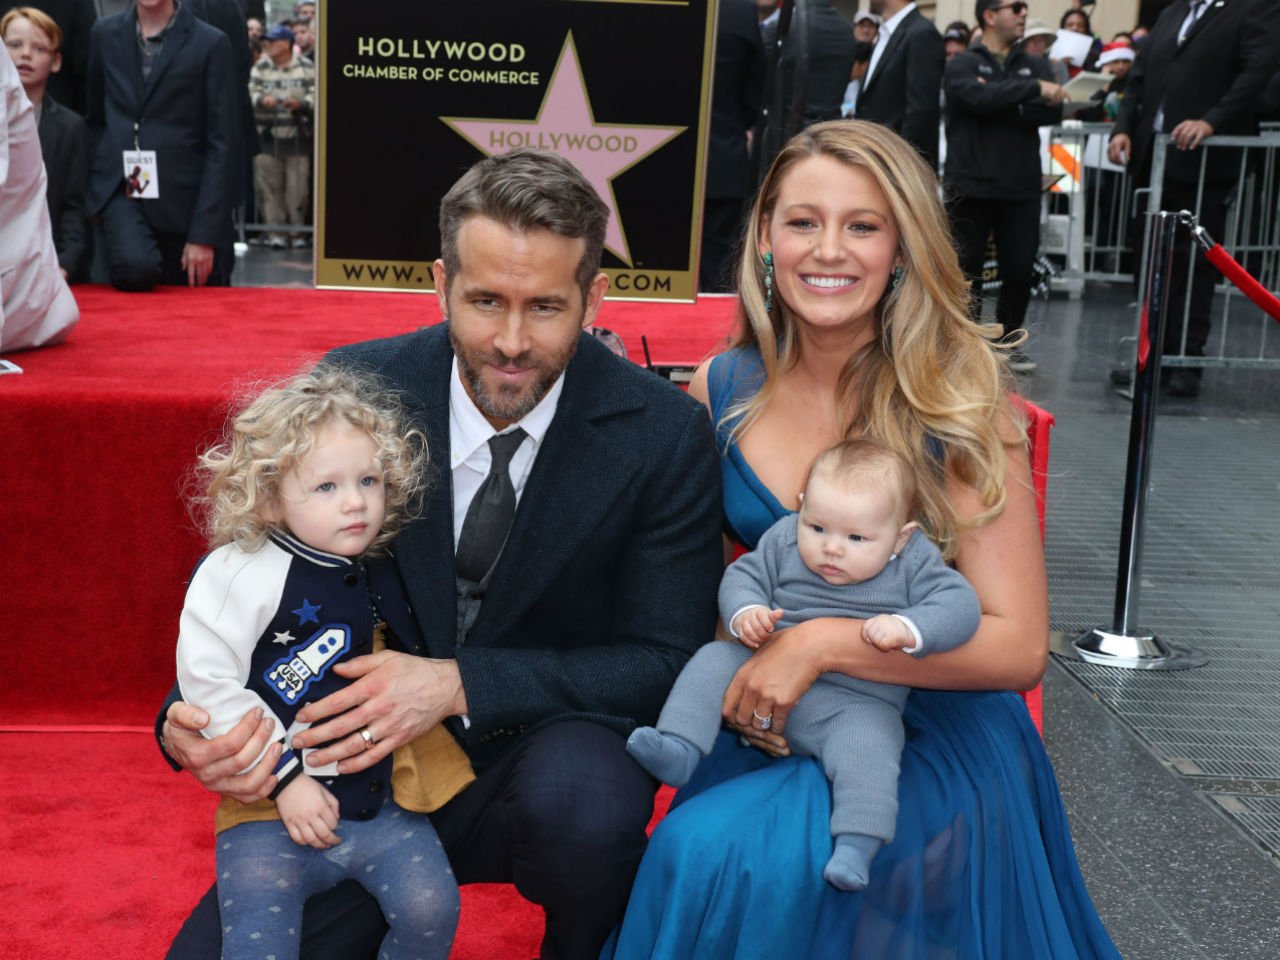 Ryan Reynolds and Blake Lively reveal their daughter's name.1280 x 960